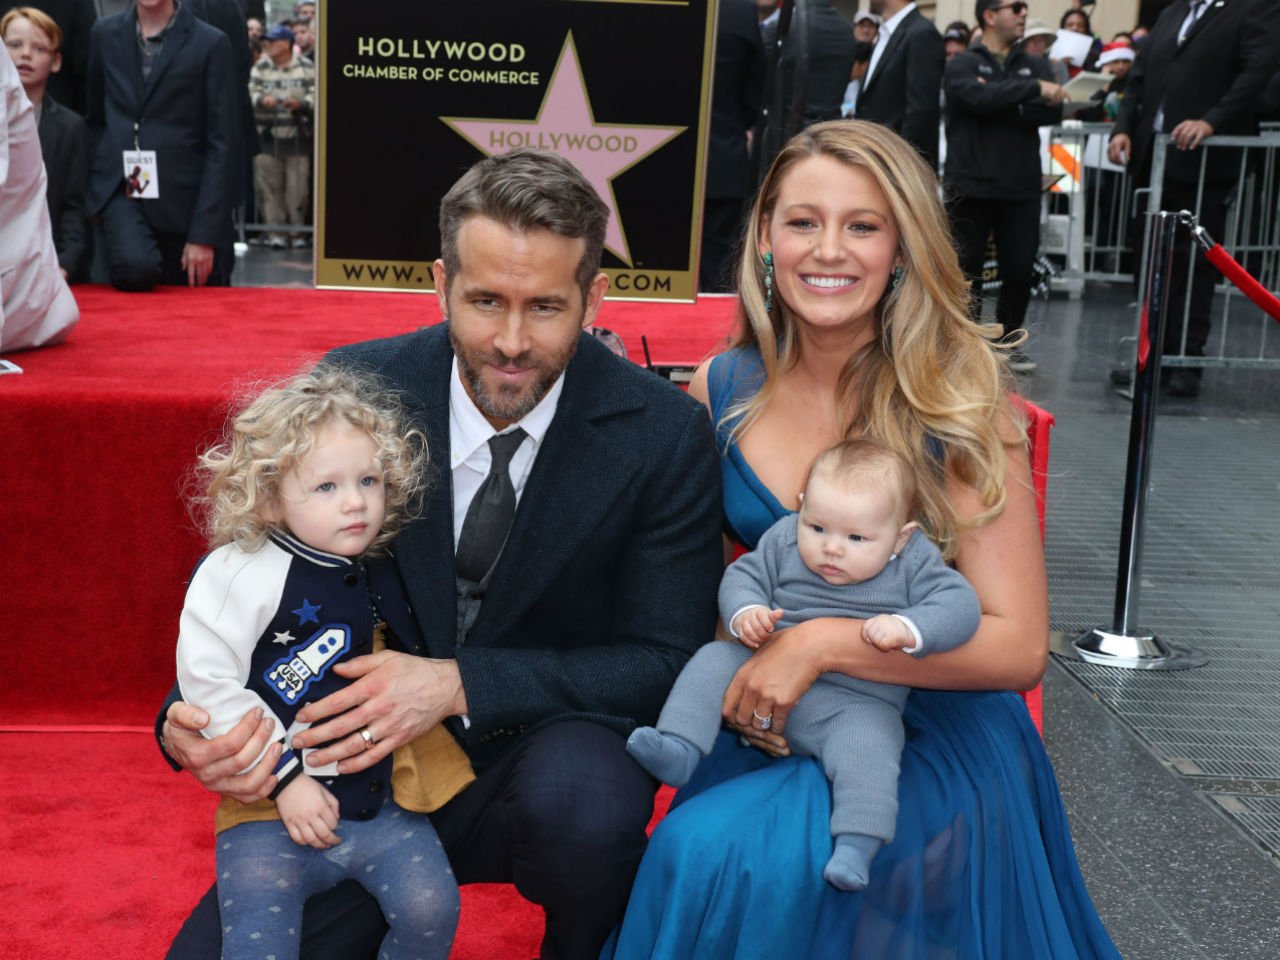 Ryan Reynolds and Blake Lively reveal their daughter's name.1280 x 960